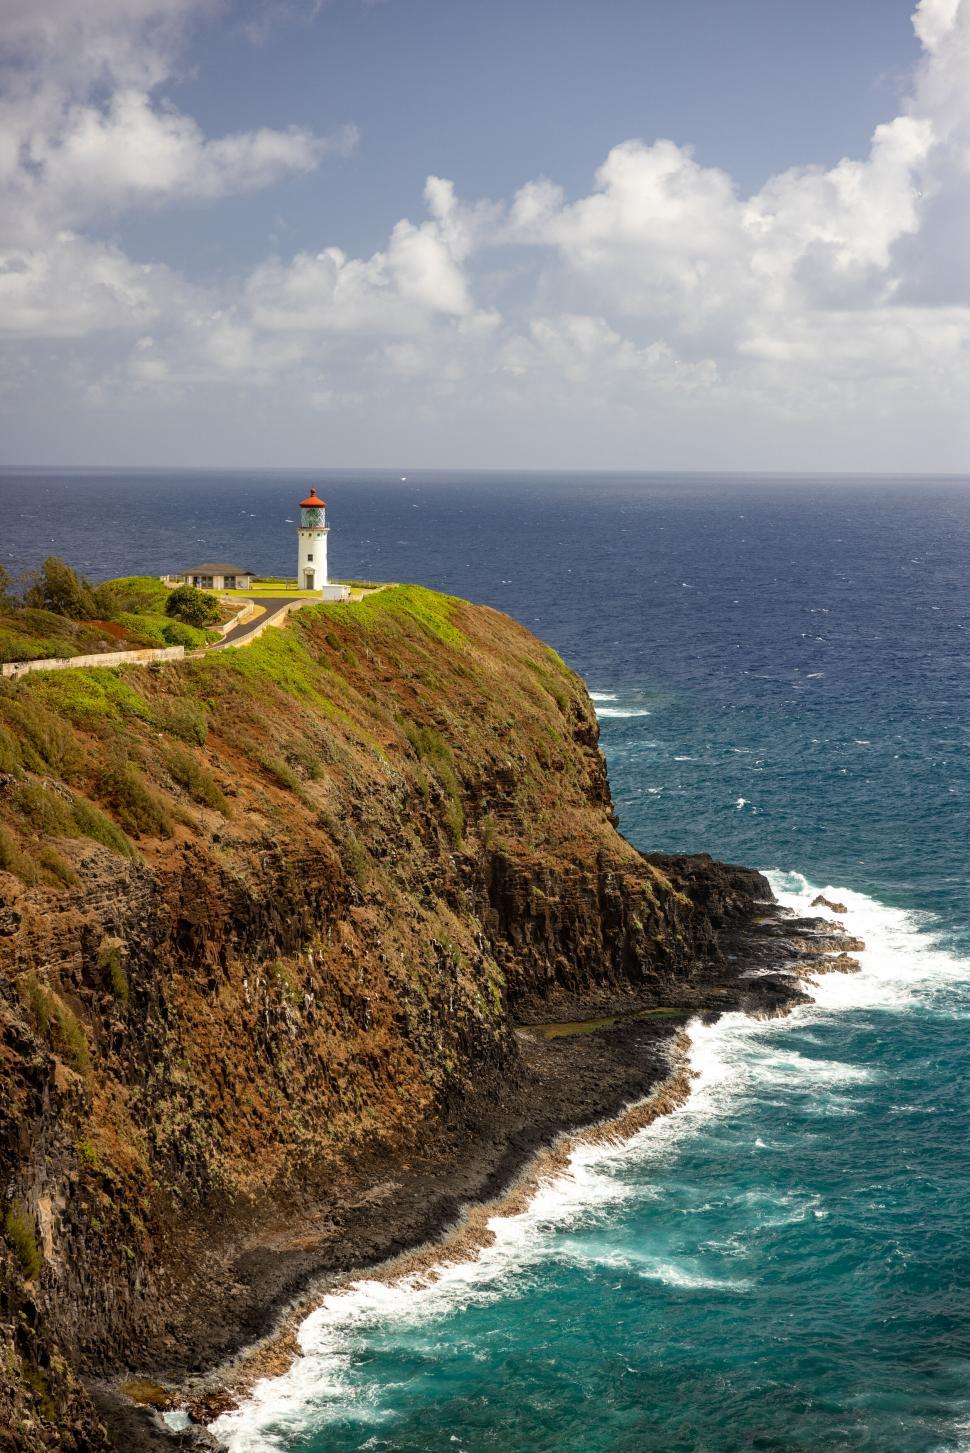 Free Image of Lighthouse on cliff overlooking the ocean 